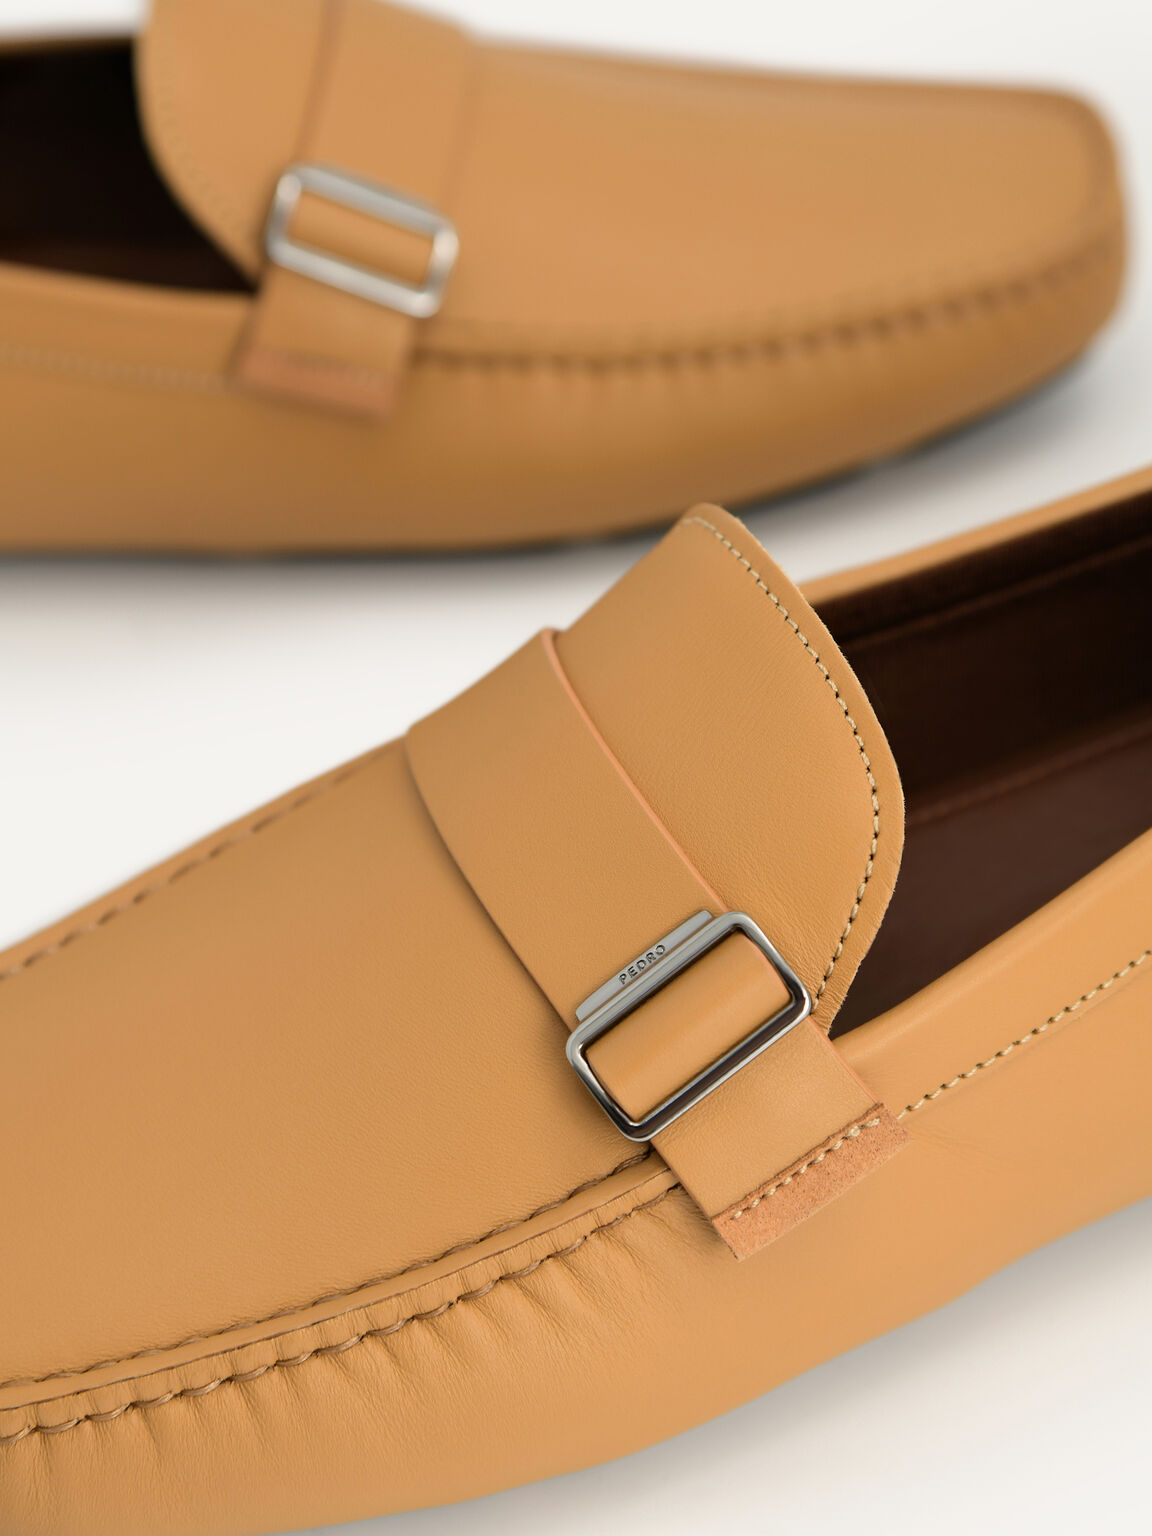 Leather Moccasins with Buckle Detail, Camel, hi-res